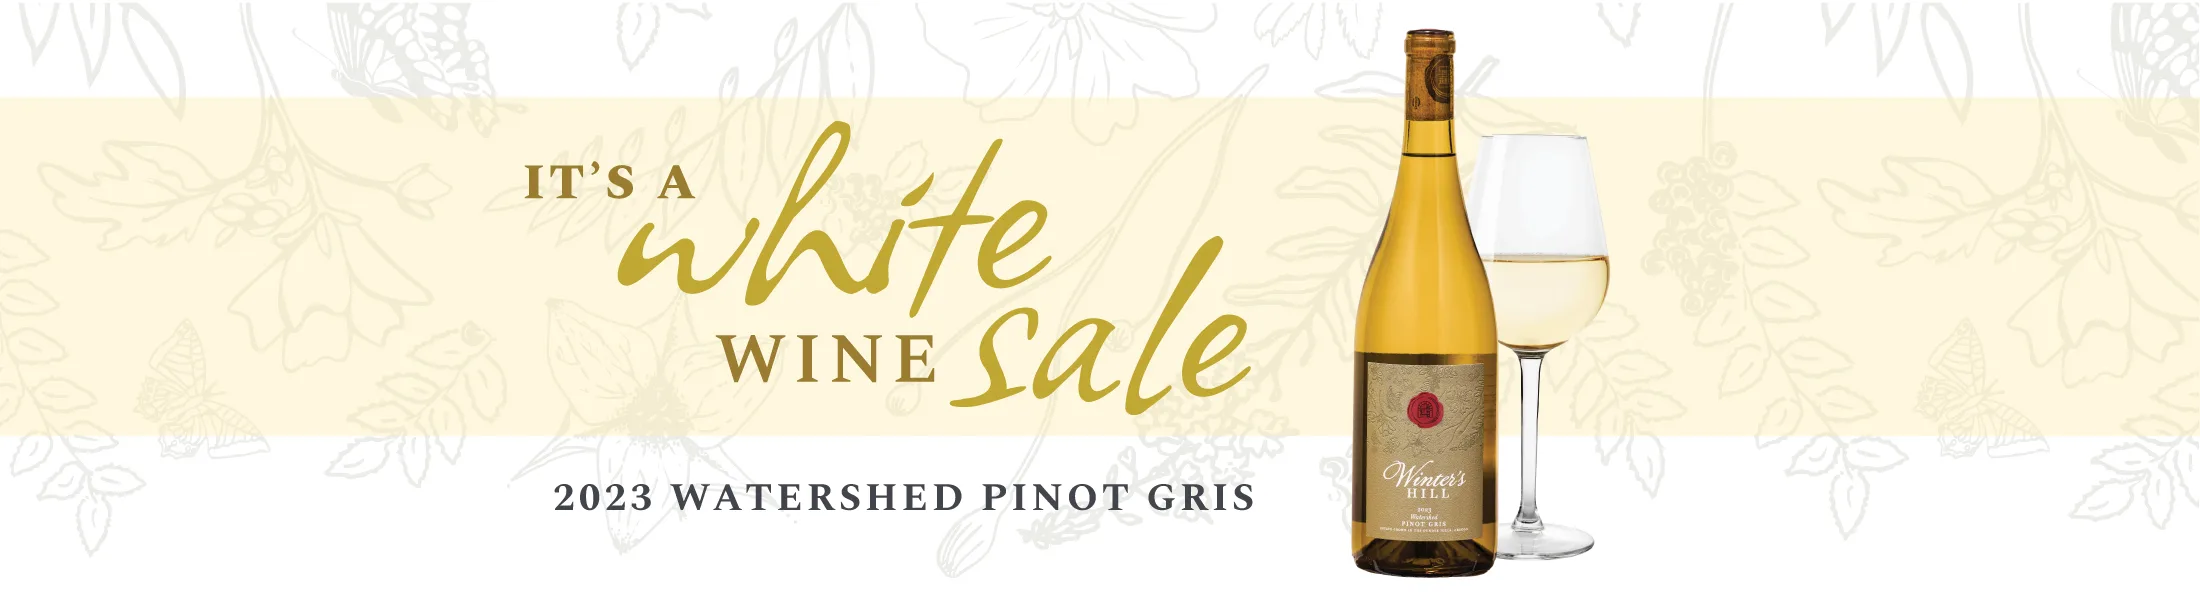 Winter's Hill Estate is having a White Wine Sale on Watershed Pinot gris through March 30, 2024.